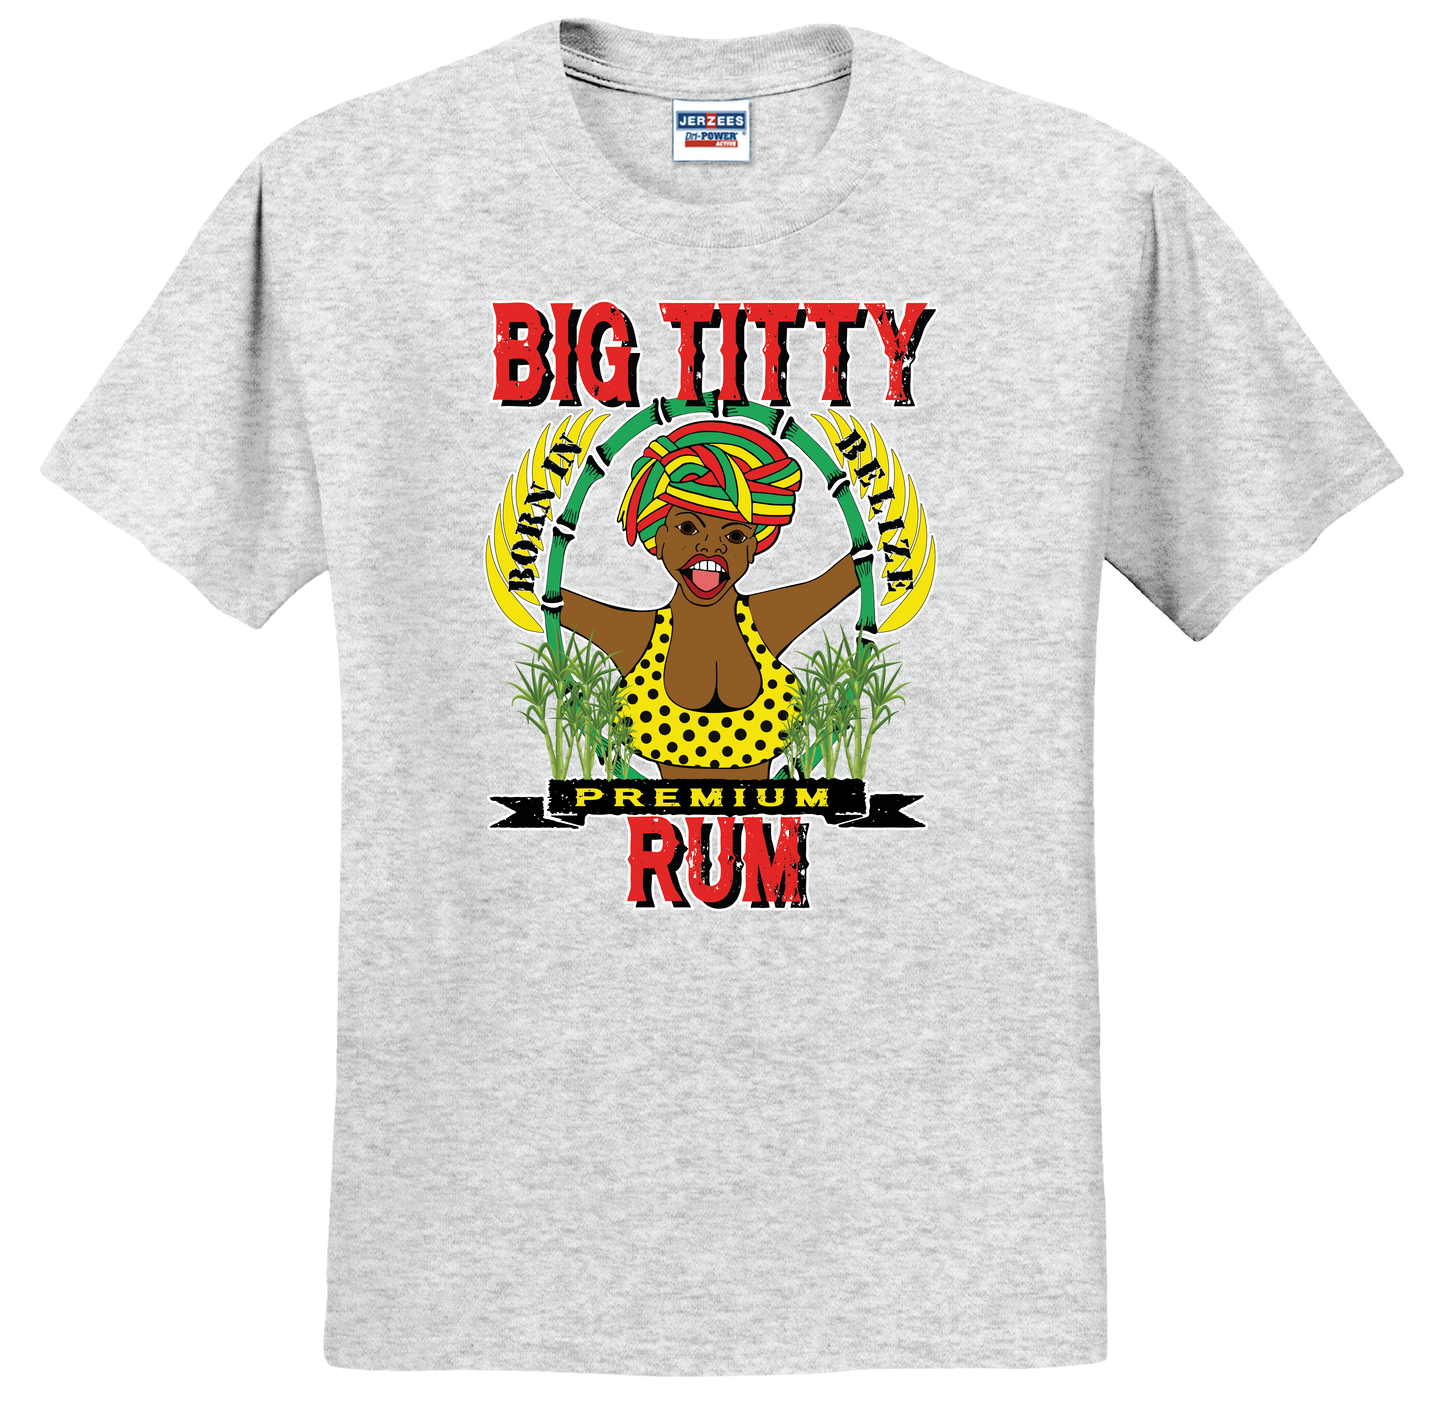 Big Titty Rum T shirt - Large logo on front